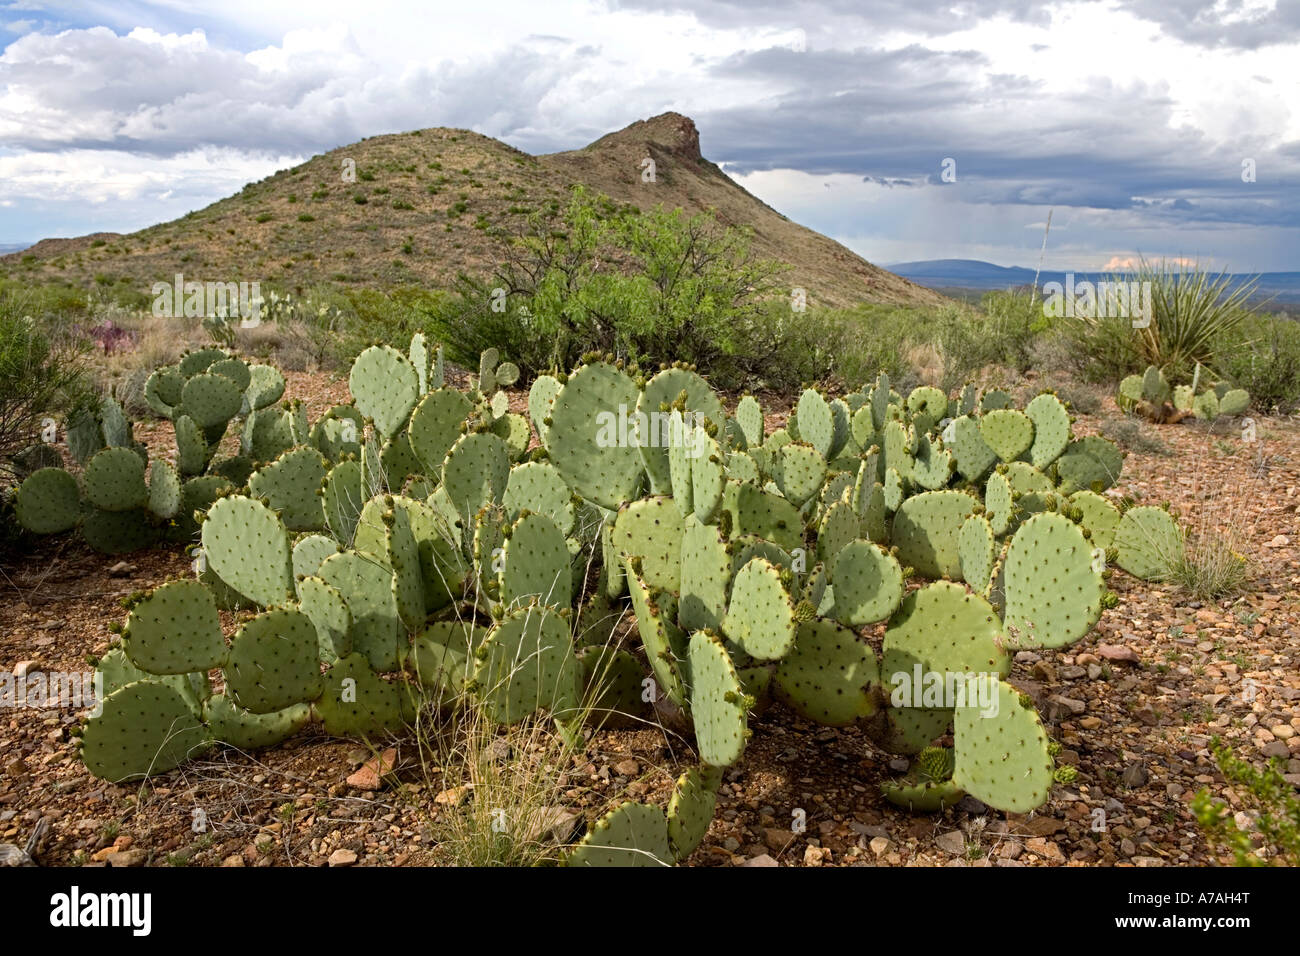 Prickly pear cactus in the Big Bend National Park West Texas Stock Photo